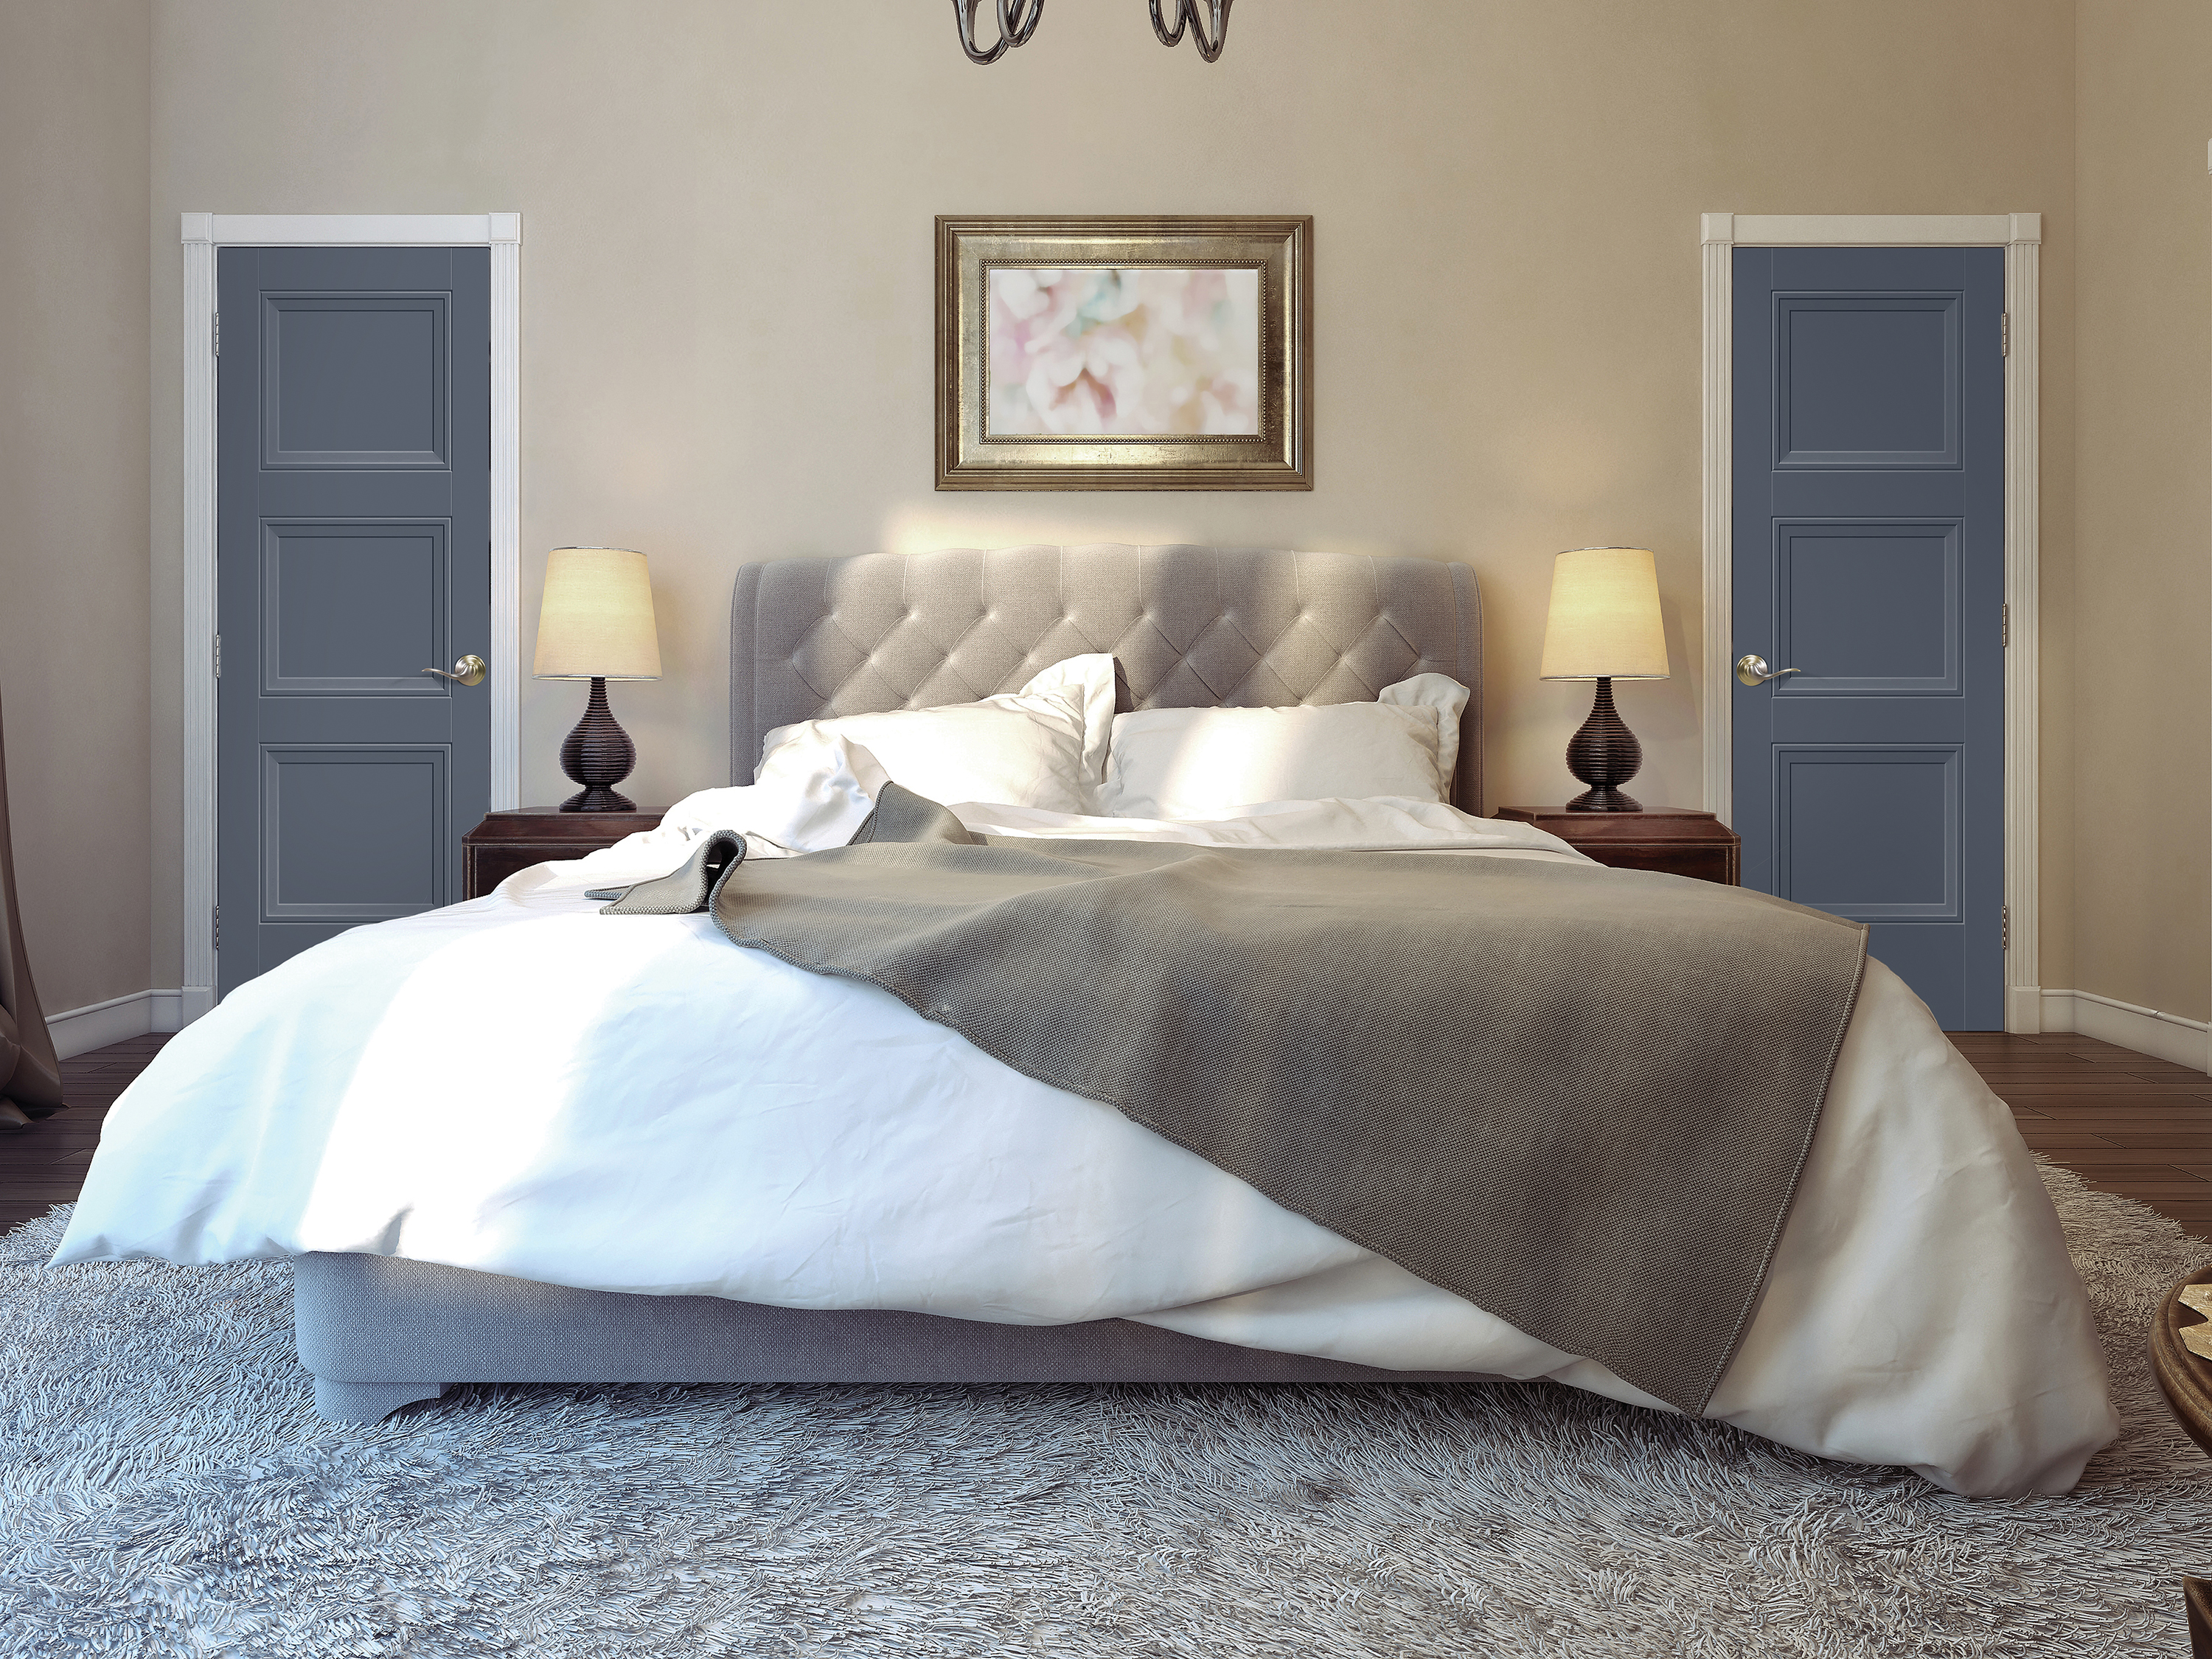 A full-on view of a bed in a primary bedroom with gray blankets, beige walls and two navy blue three-panel doors, one on each side of the headboard